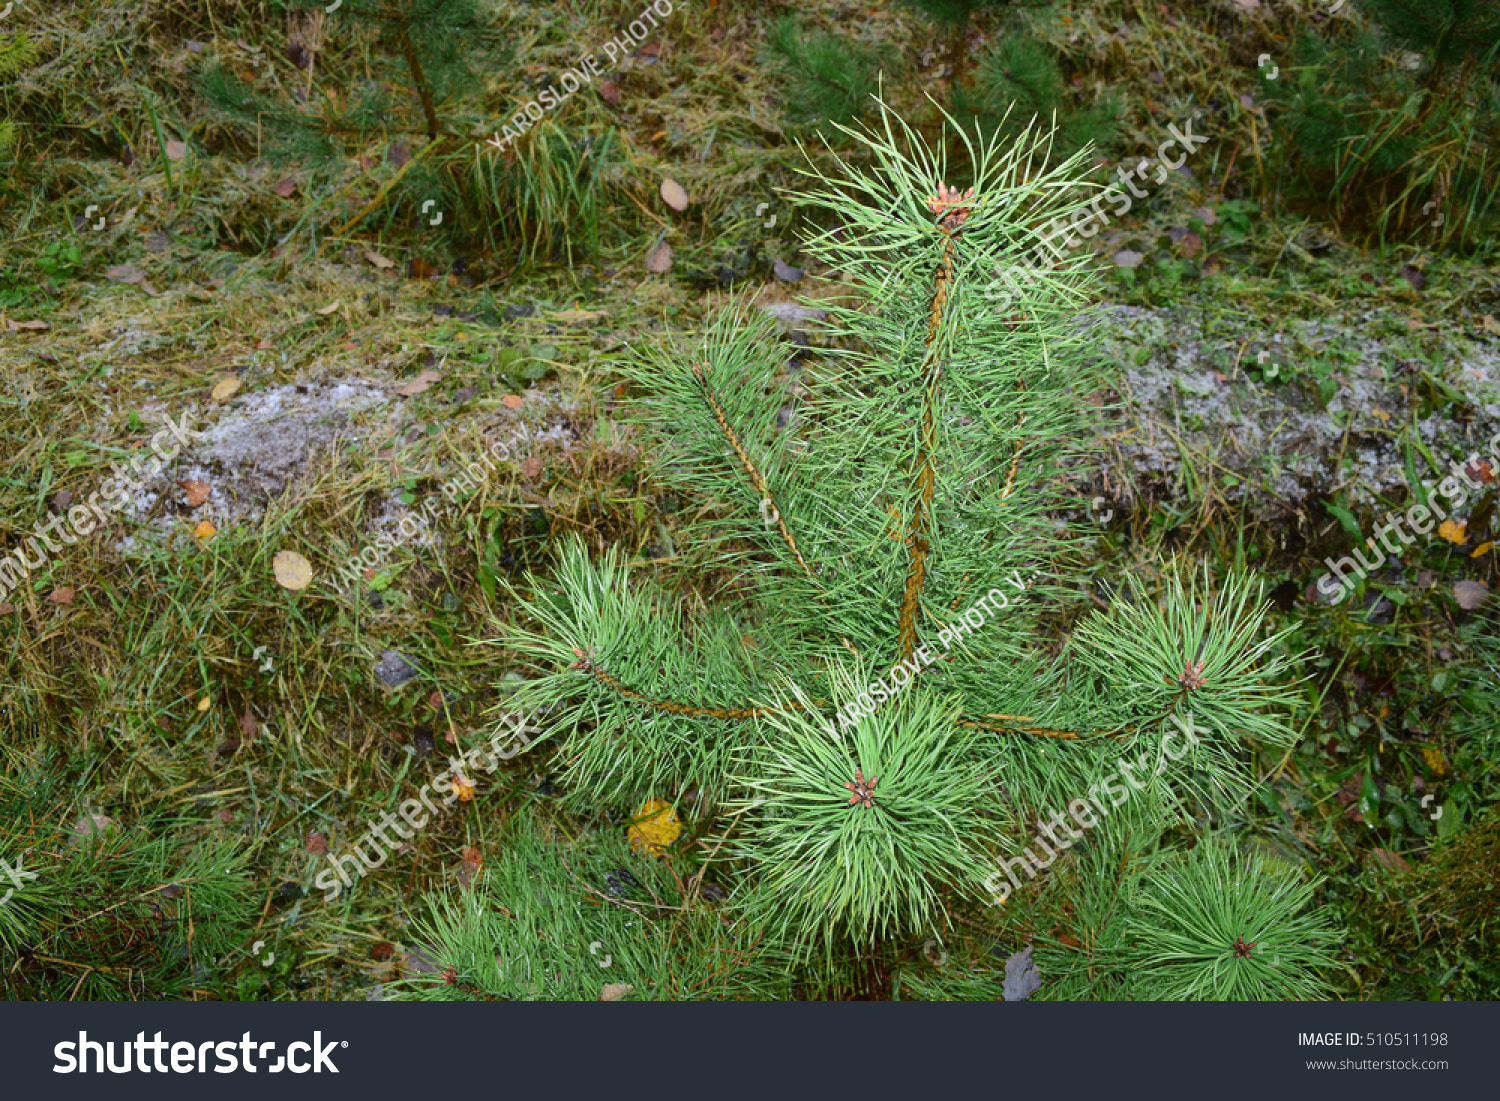 A view of the green small pine trees in the Russian forest #510511198